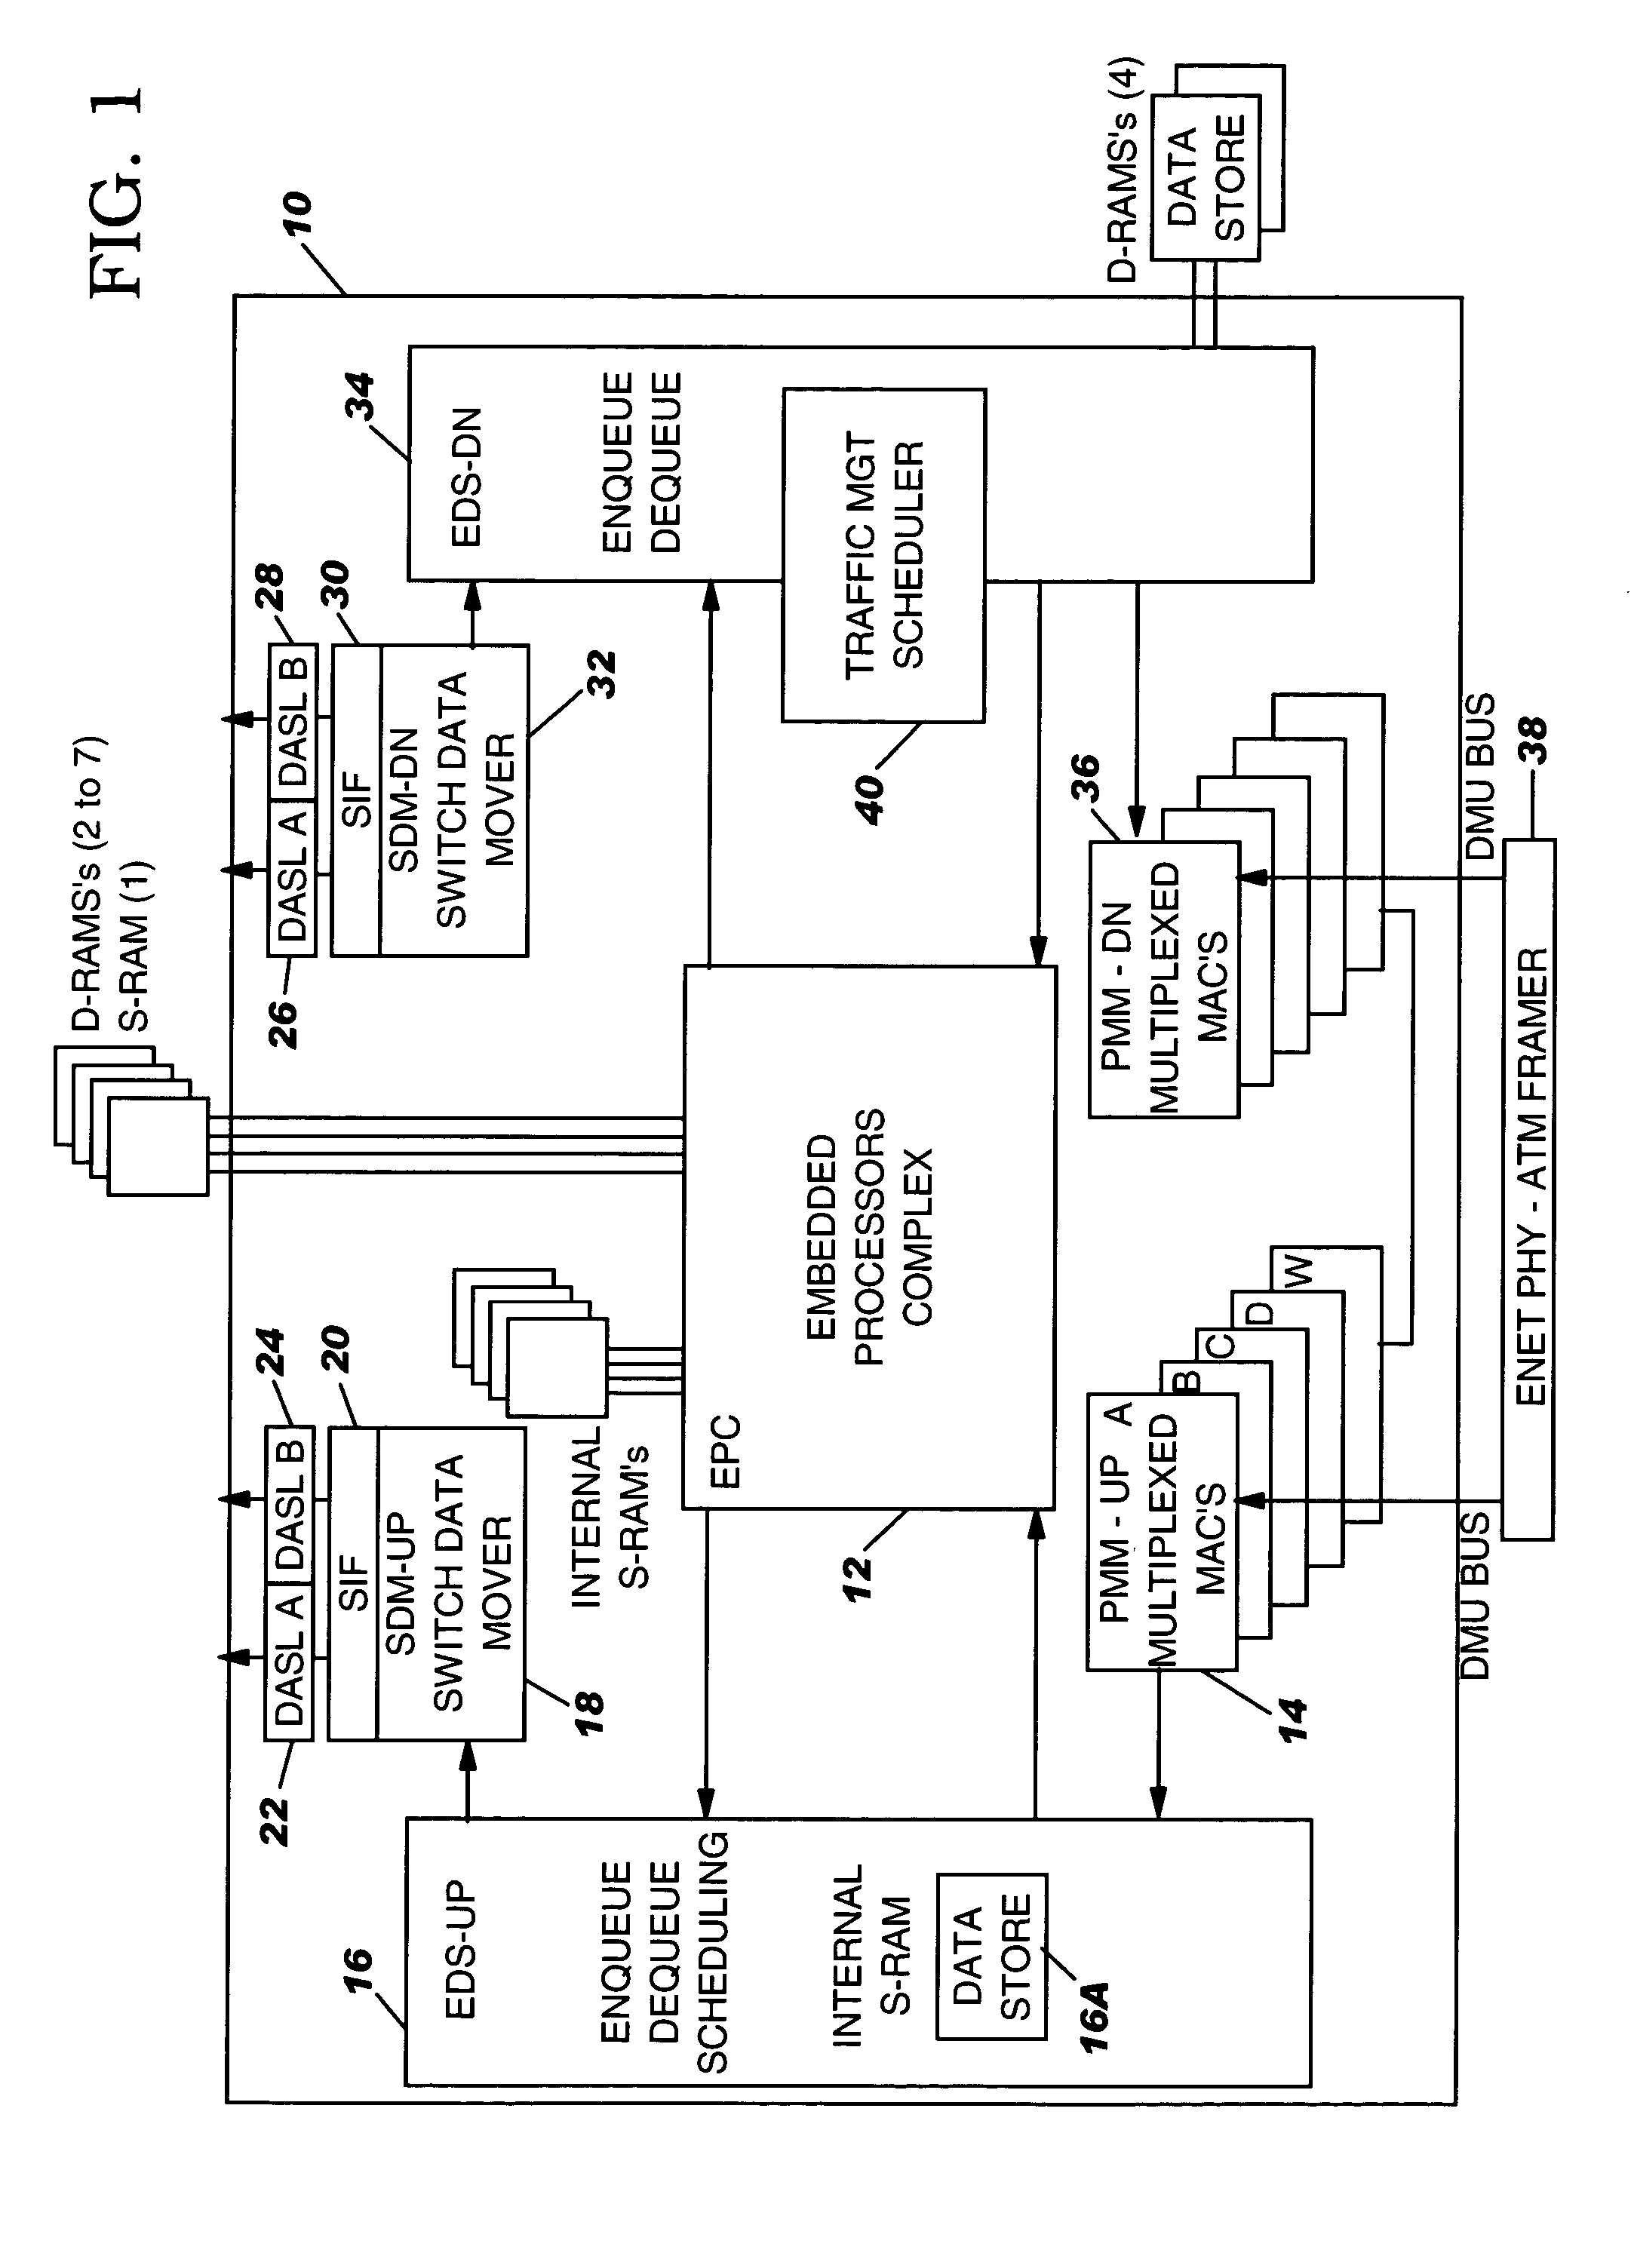 Apparatus and method to coordinate calendar searches in a network scheduler given limited resources